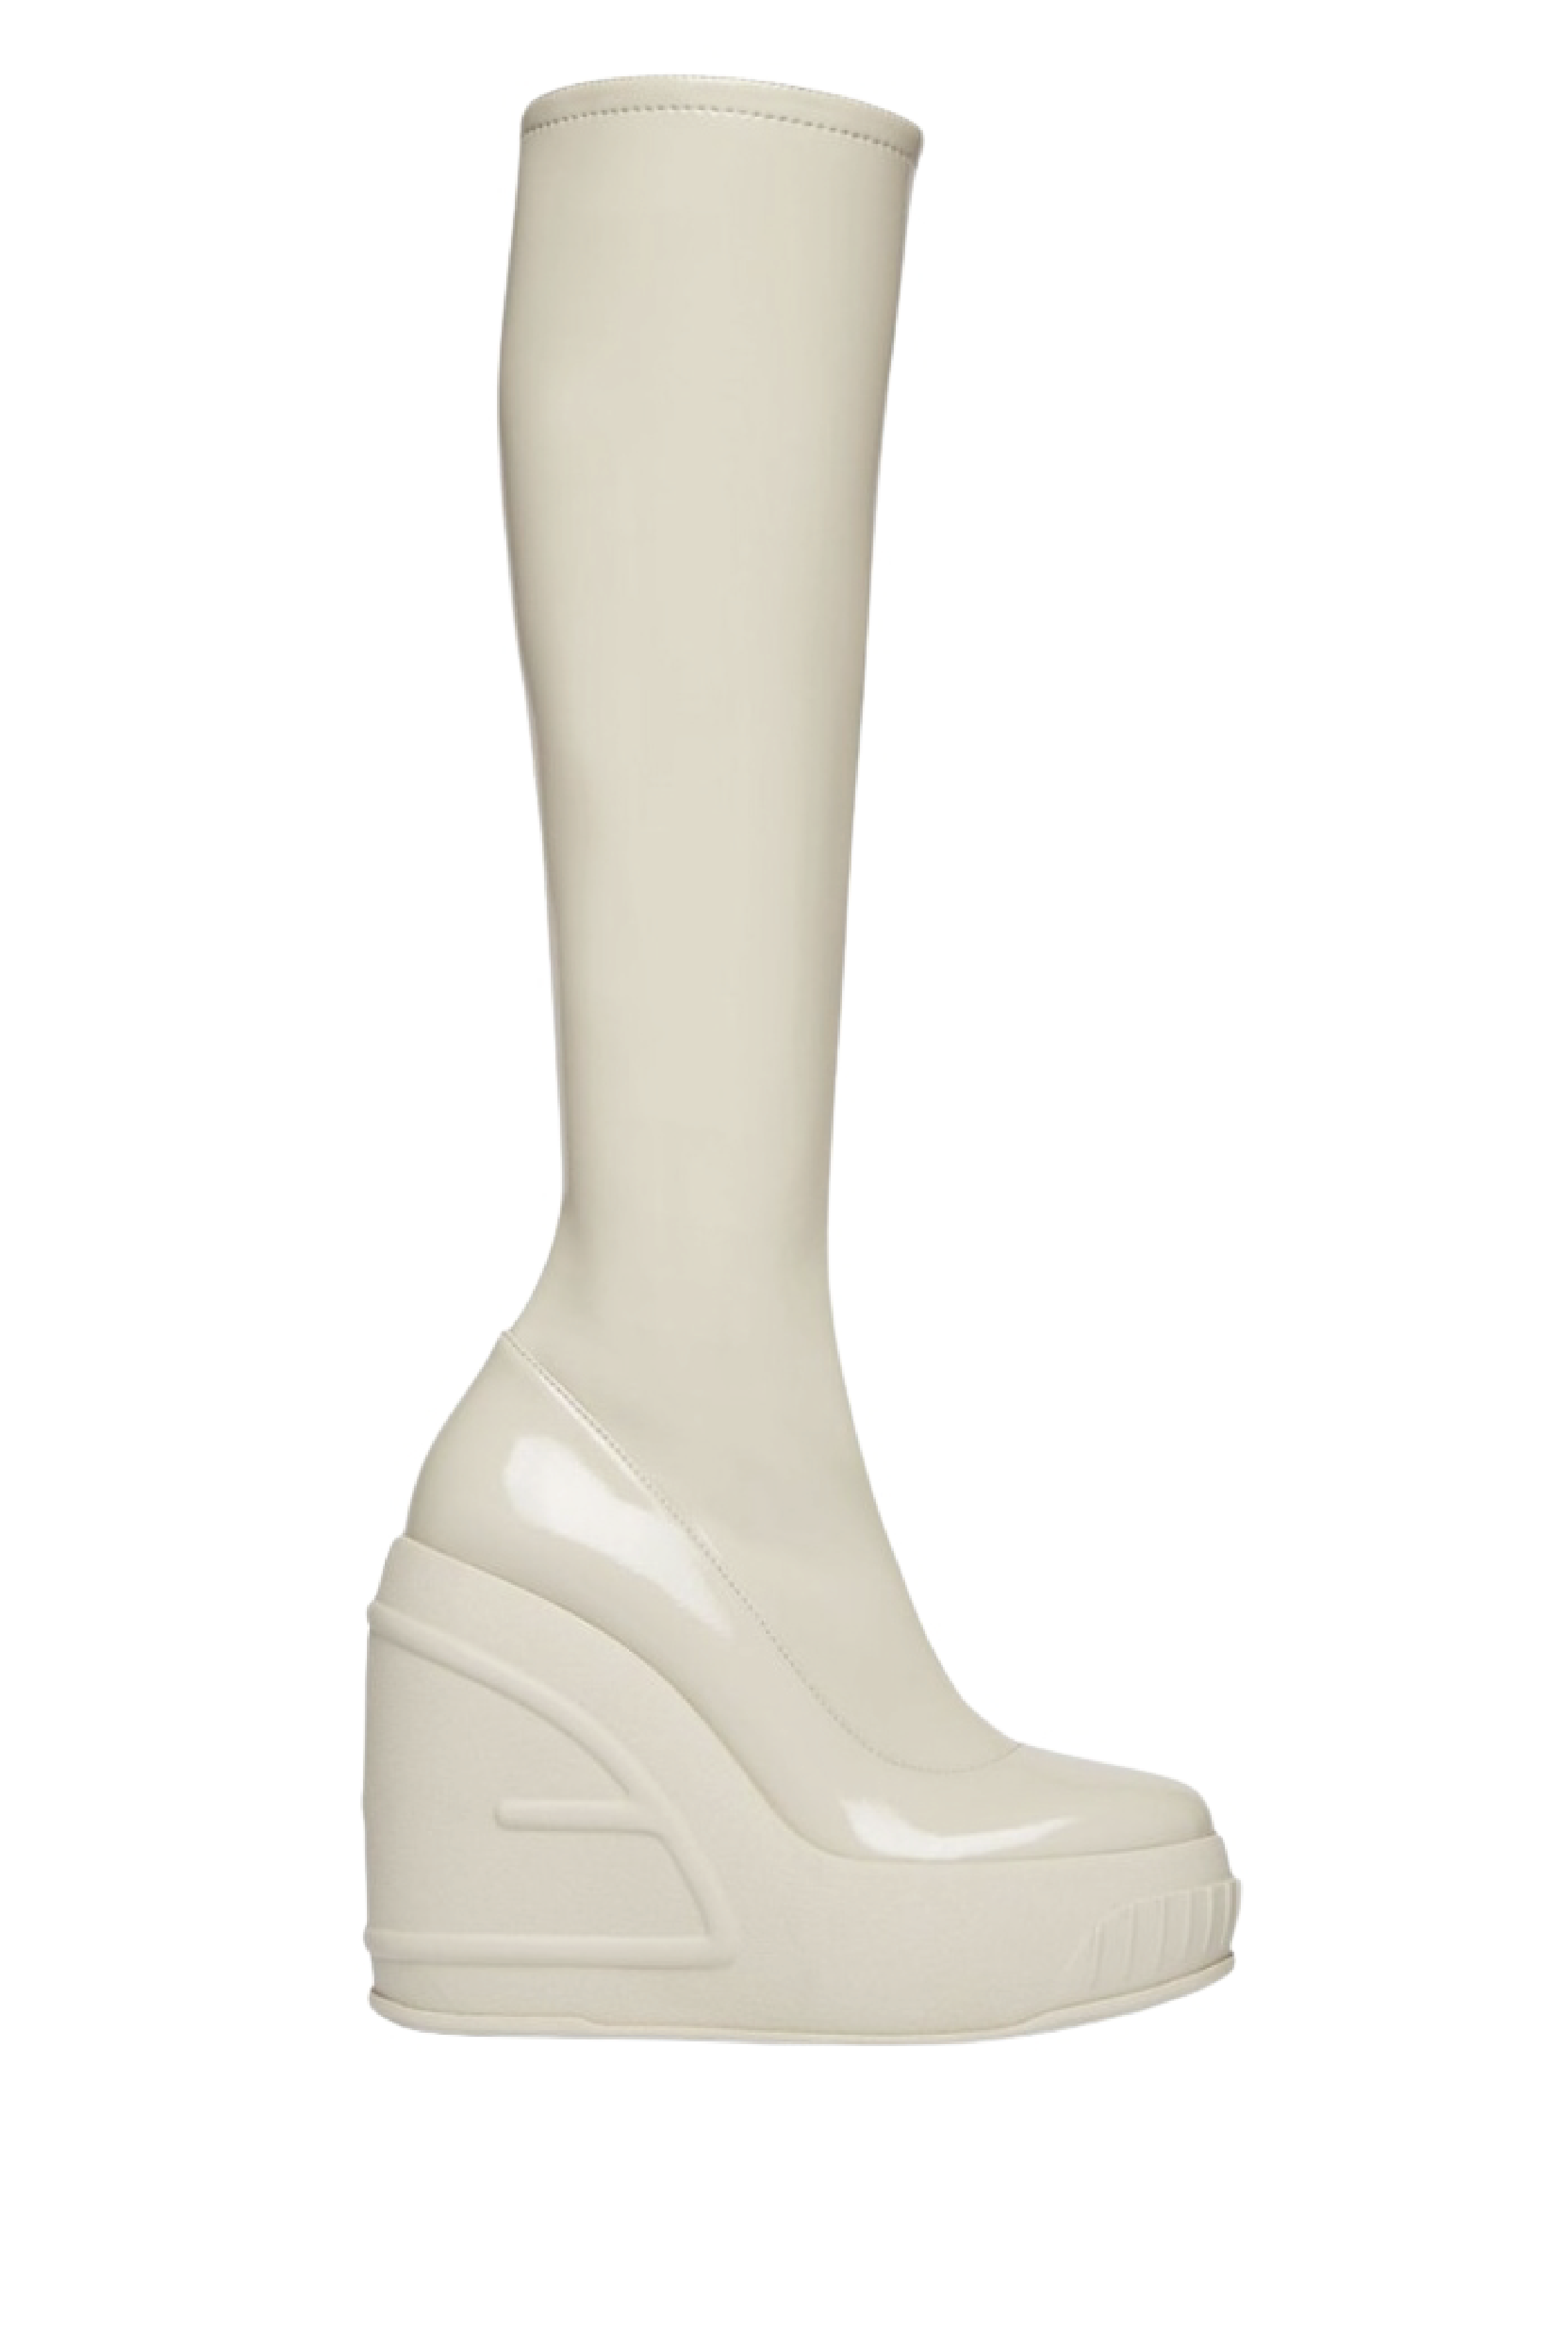 Coliseo Boots - Ivory